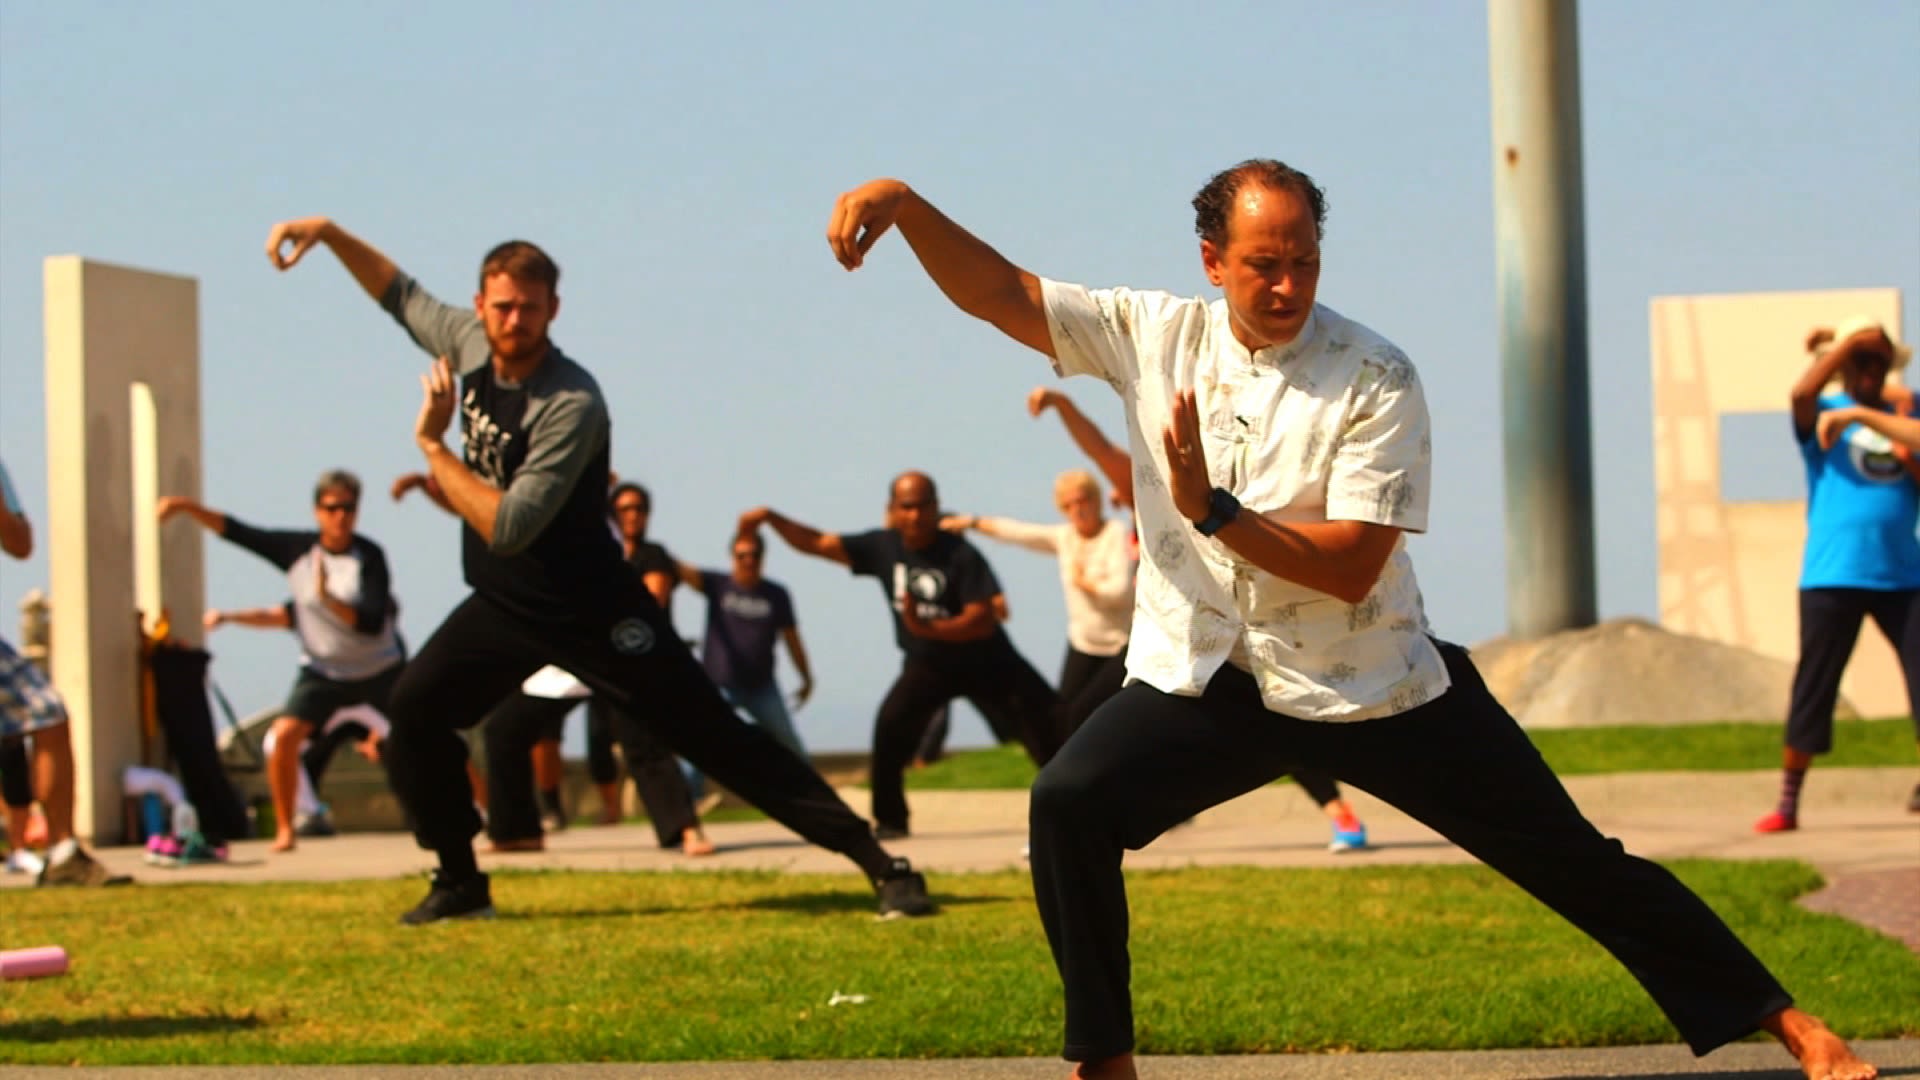 Tai Chi for Over 50s - Tai Chi Health Benefits and Classes for